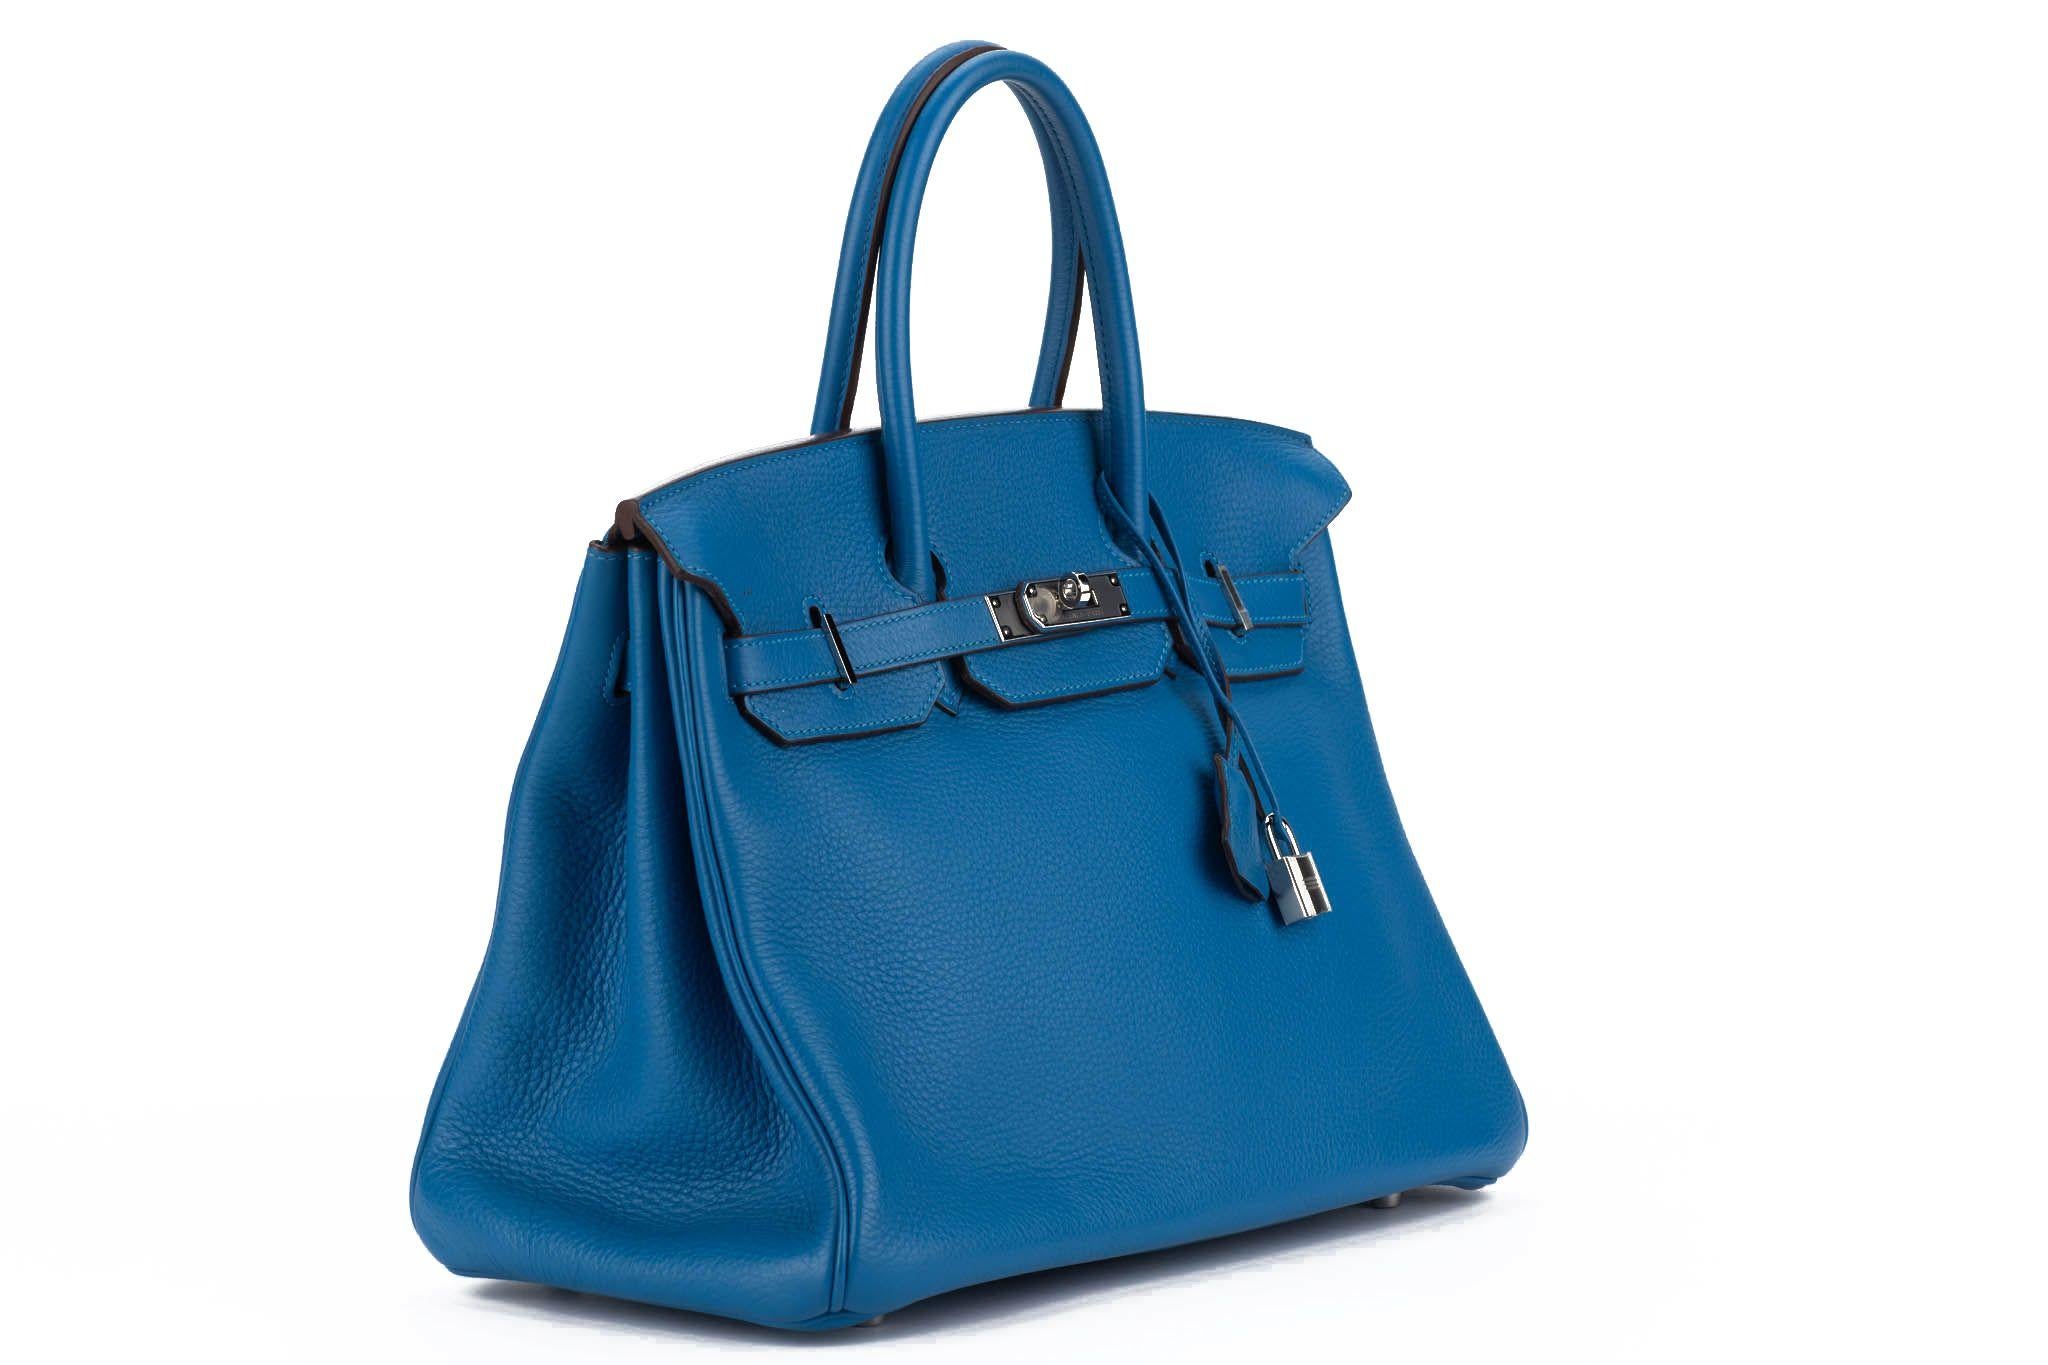 Hermès Birkin 35 in  taurillon clemence blue izmir  with palladium hardware. Pre-owned in excellent condition. 
Comes with original large and small dust cover.